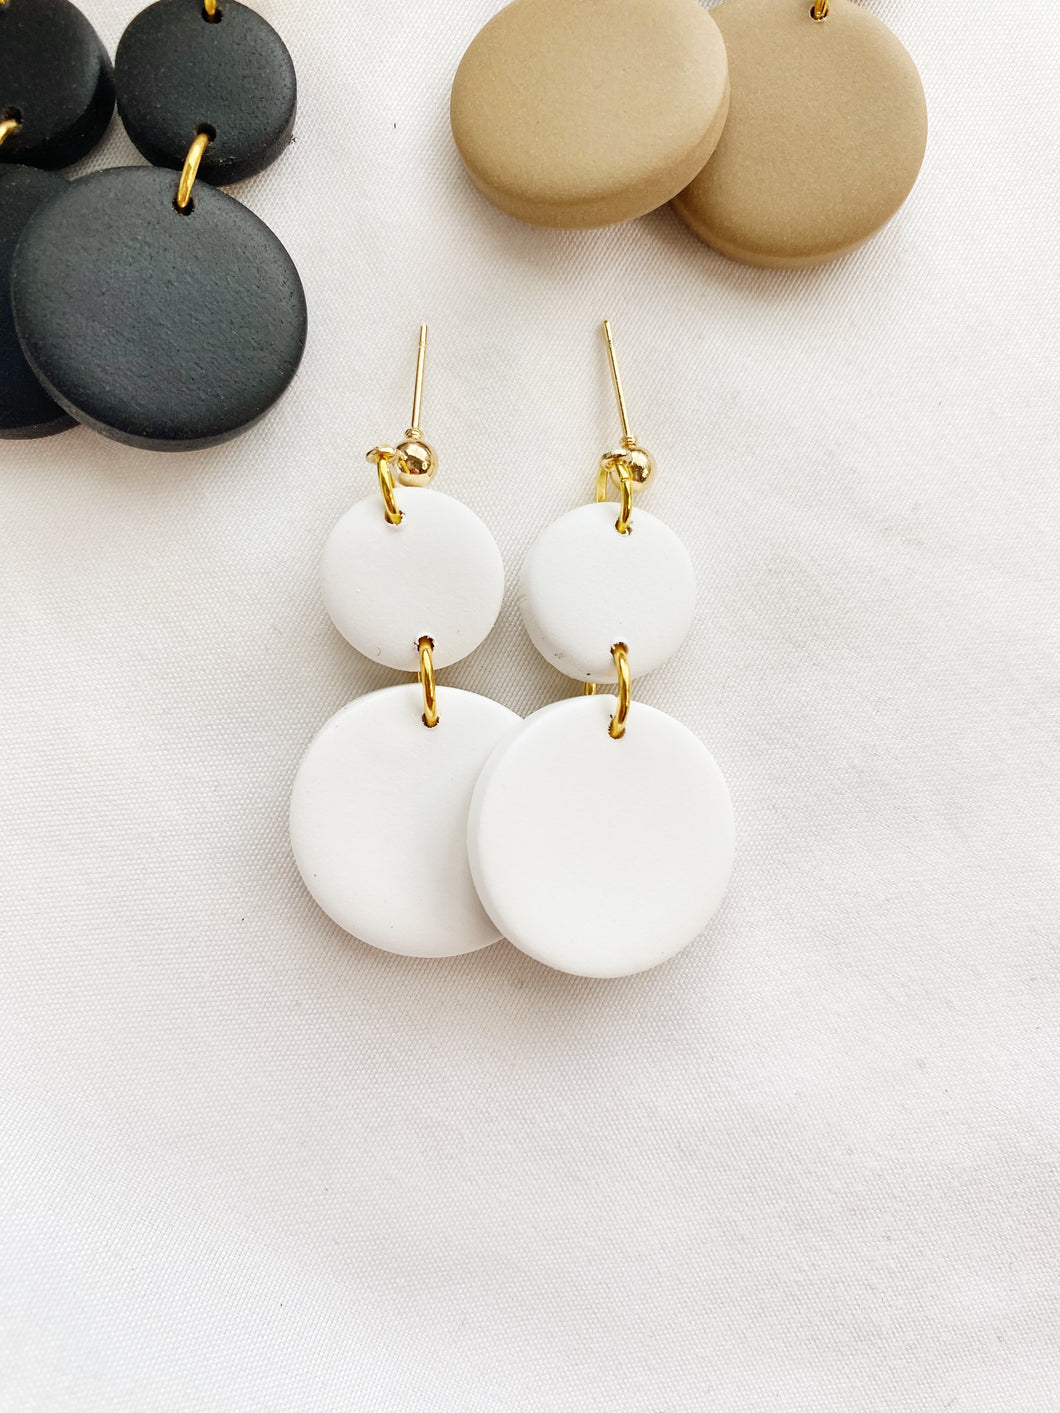 Malibu | The Timeless Collection | Handmade Polymer Clay Earrings